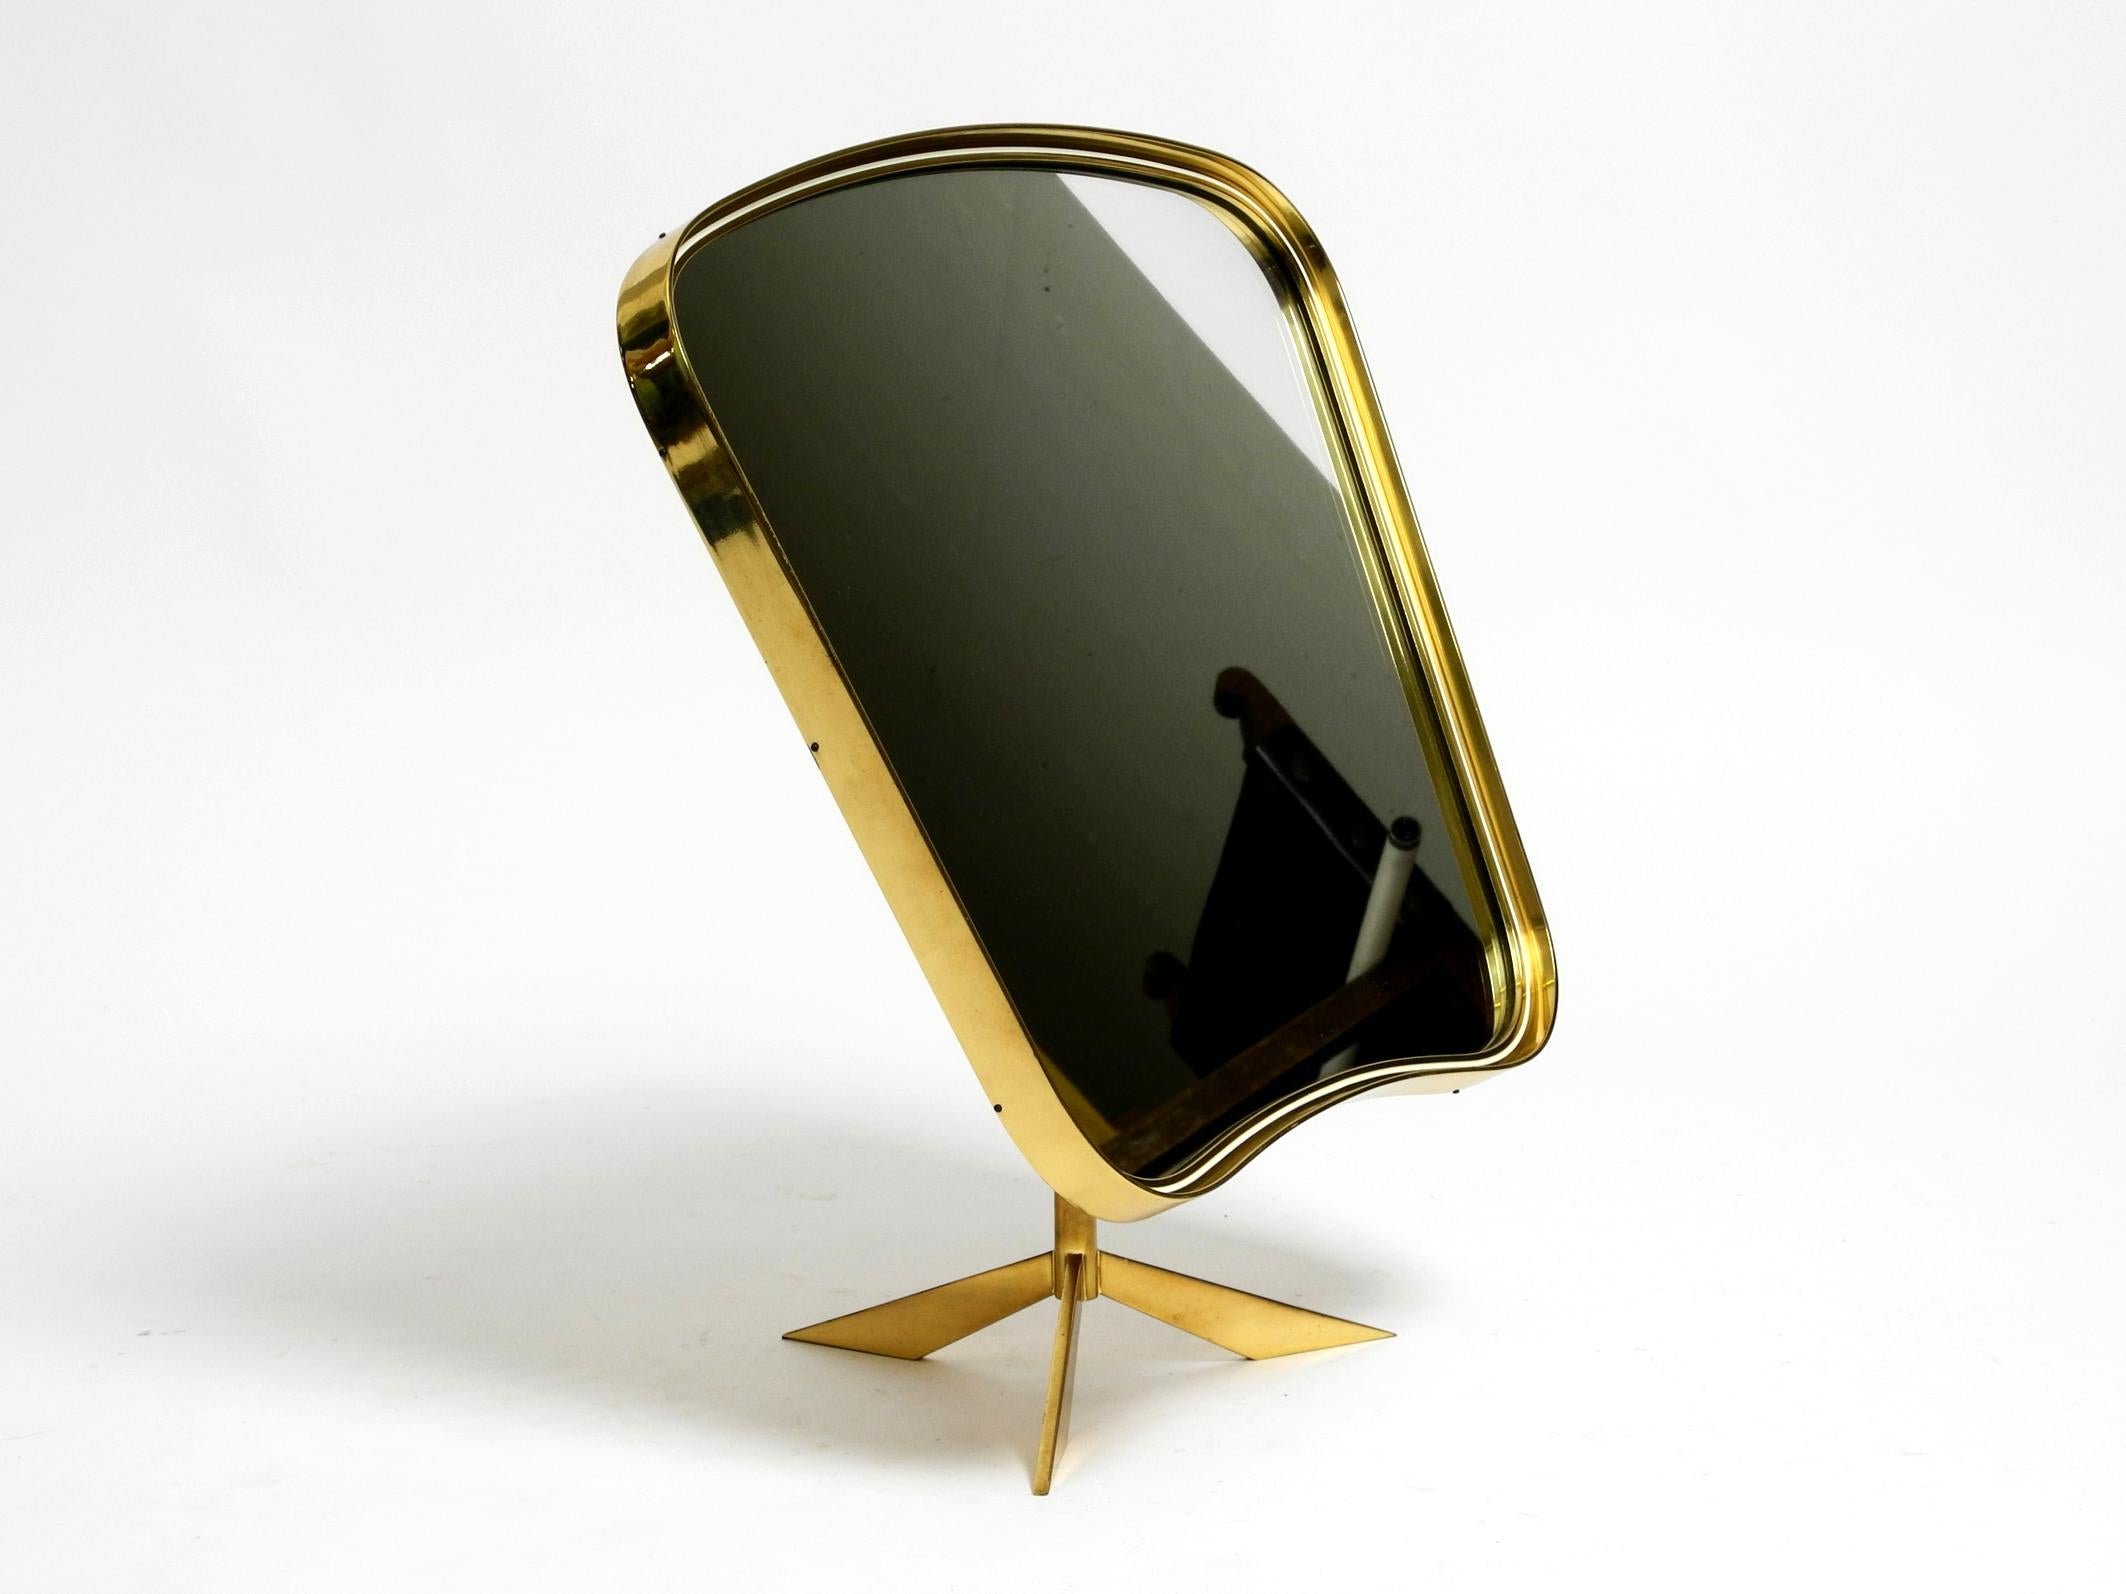 Beautiful, very rare, large, adjustable Mid Century Modern tripod table mirror.
Manufacturer is Vereinigte Werkstätten. Made in Germany.
In the typical 1950s design with a curved brass frame and tripod base.
Entire mirror frame is made of heavy